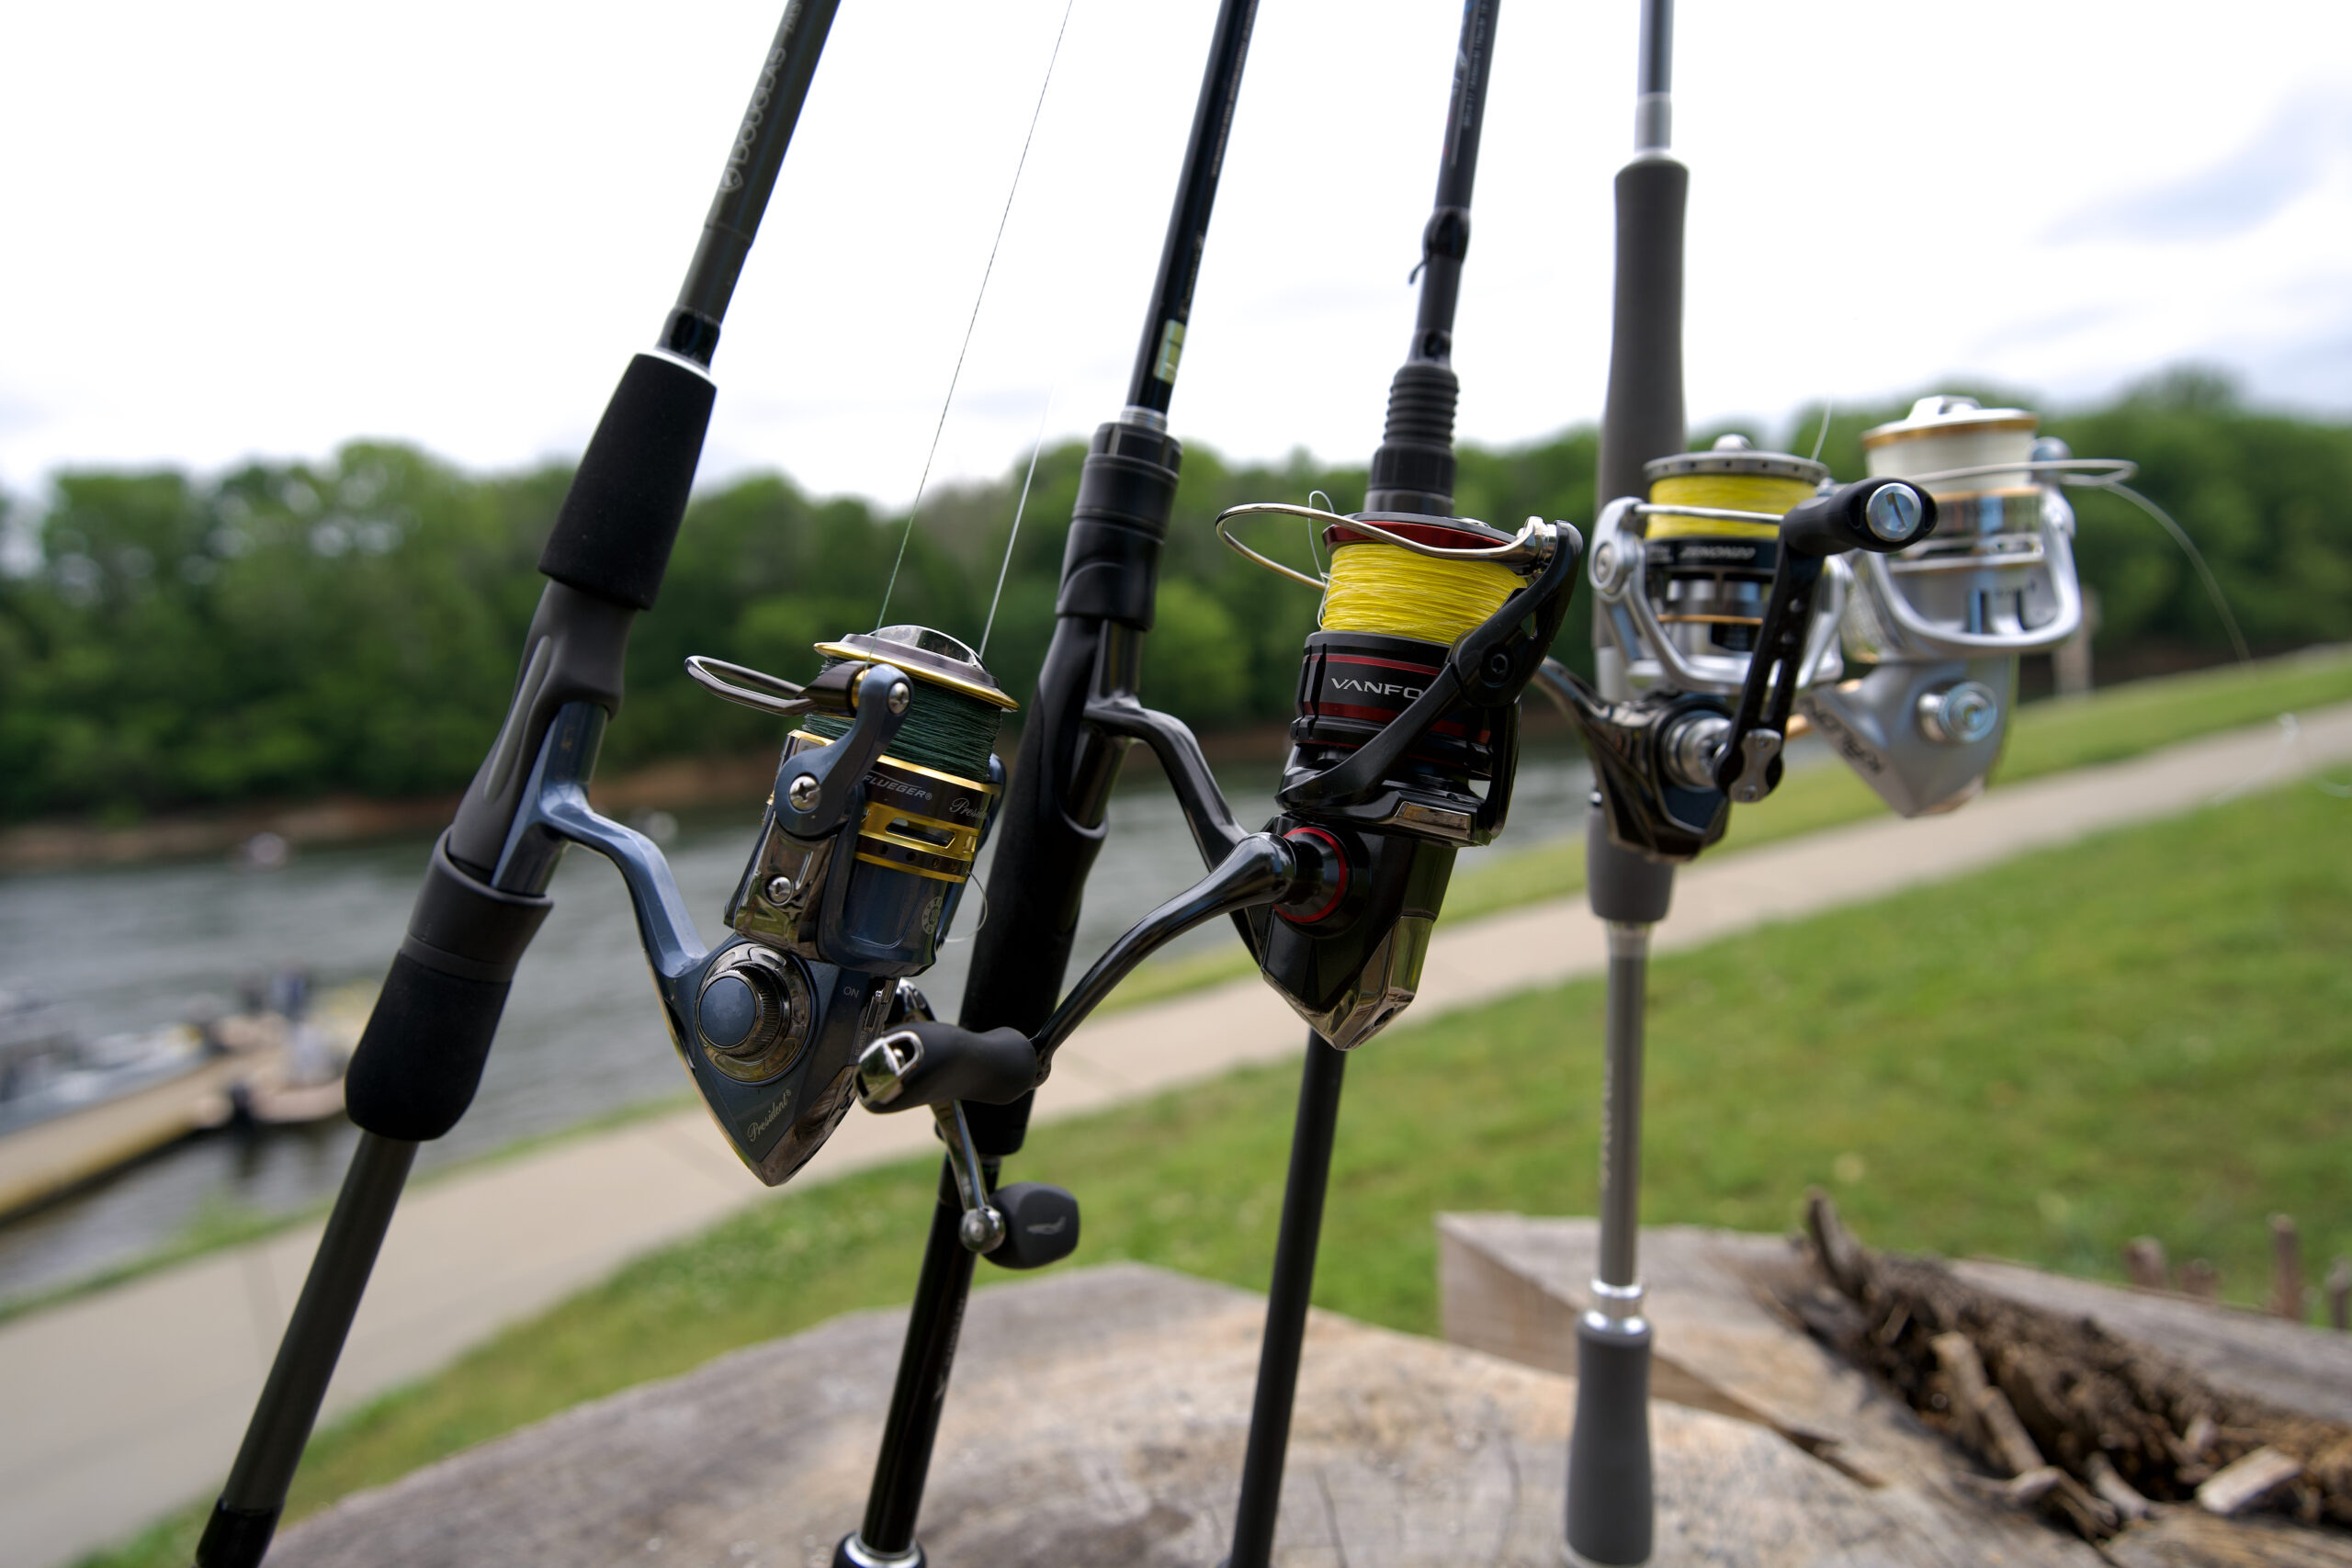 Crappie Fishing Poles - Top Crappie Rods To Own Within Your Budget